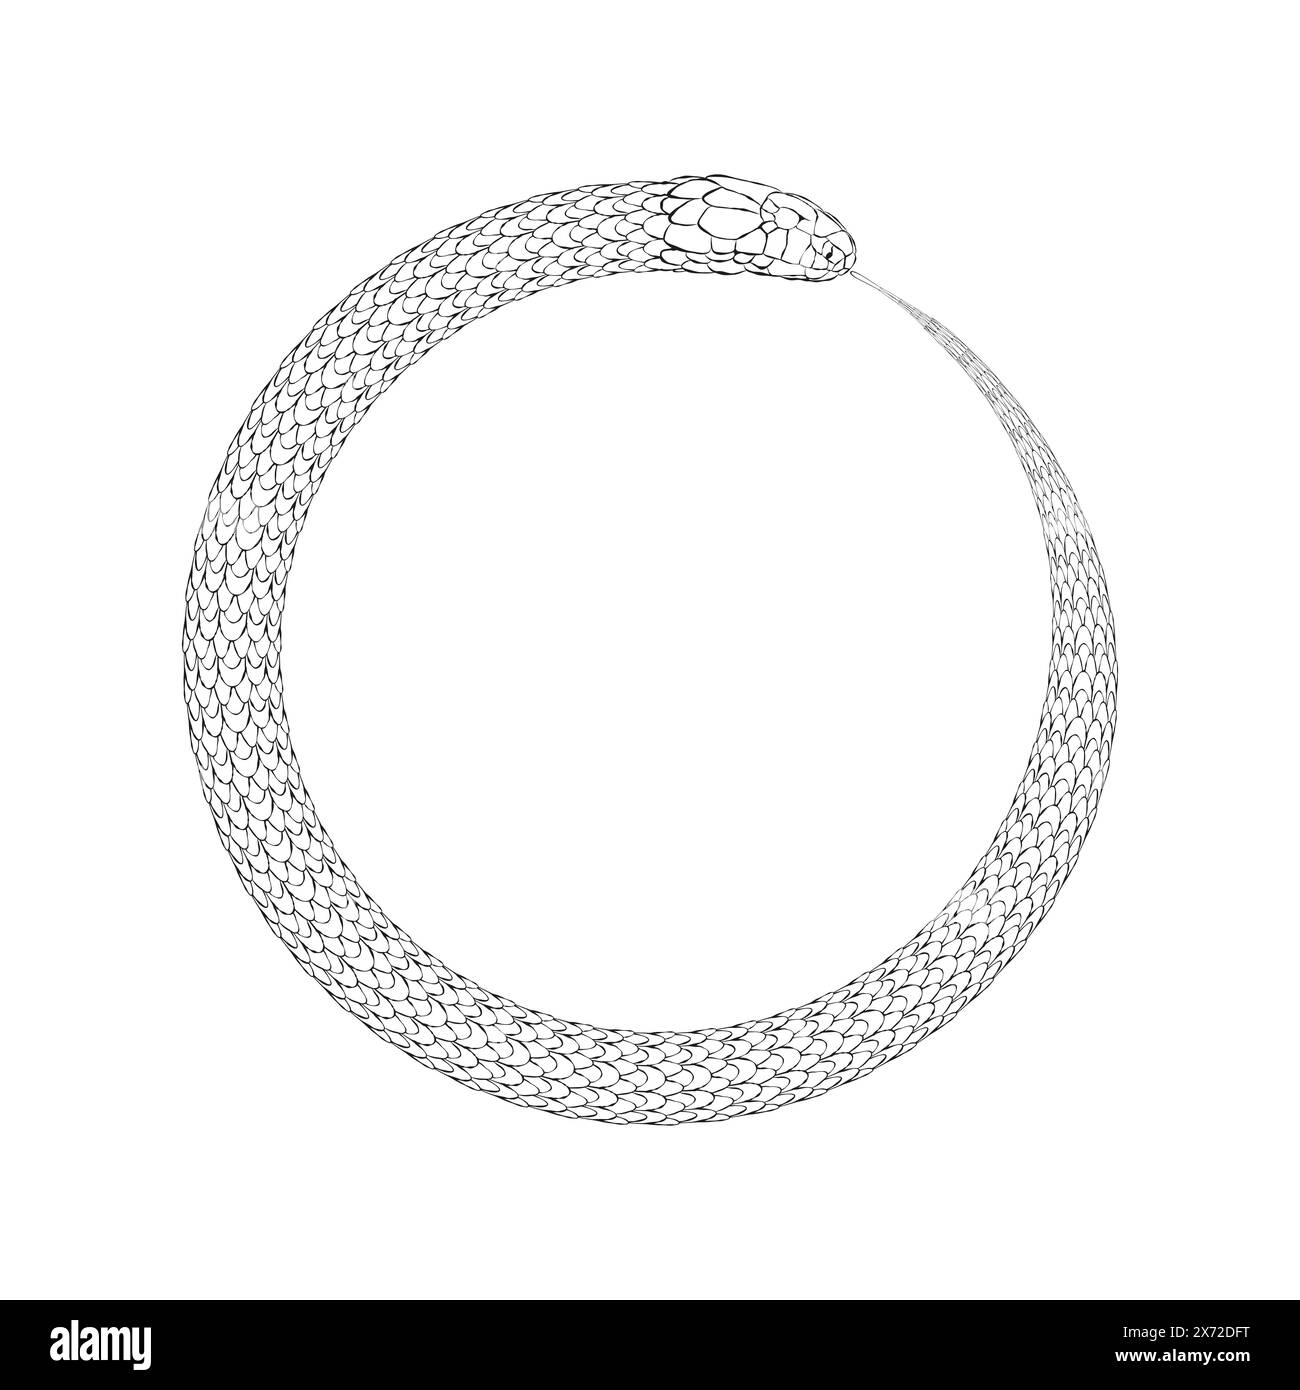 Ouroboros, linear snake, black symbol of the year 2025. Vector illustration isolated white background. Stock Vector